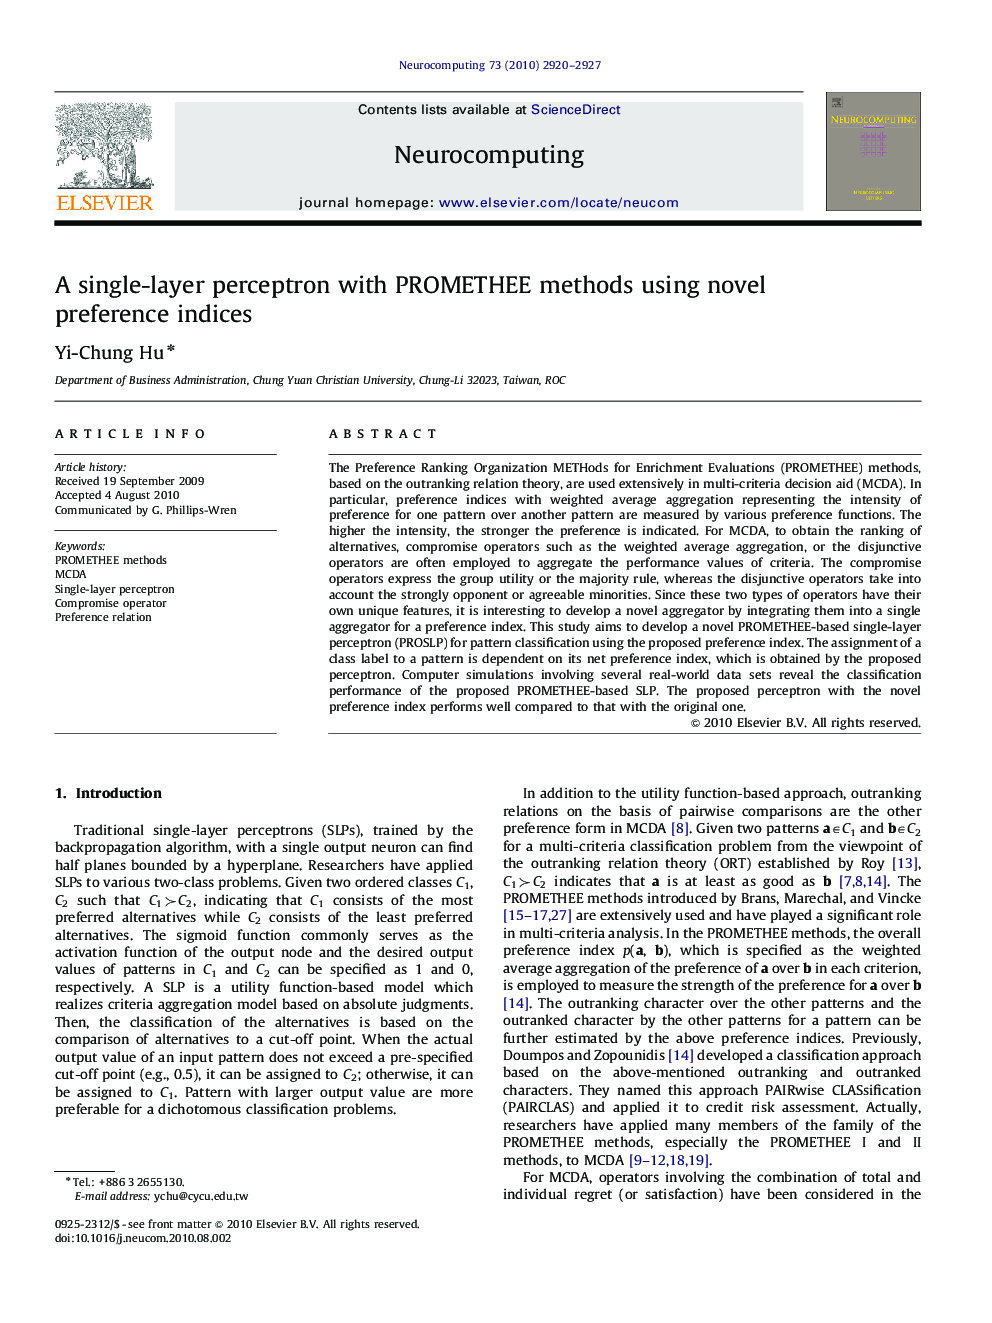 A single-layer perceptron with PROMETHEE methods using novel preference indices